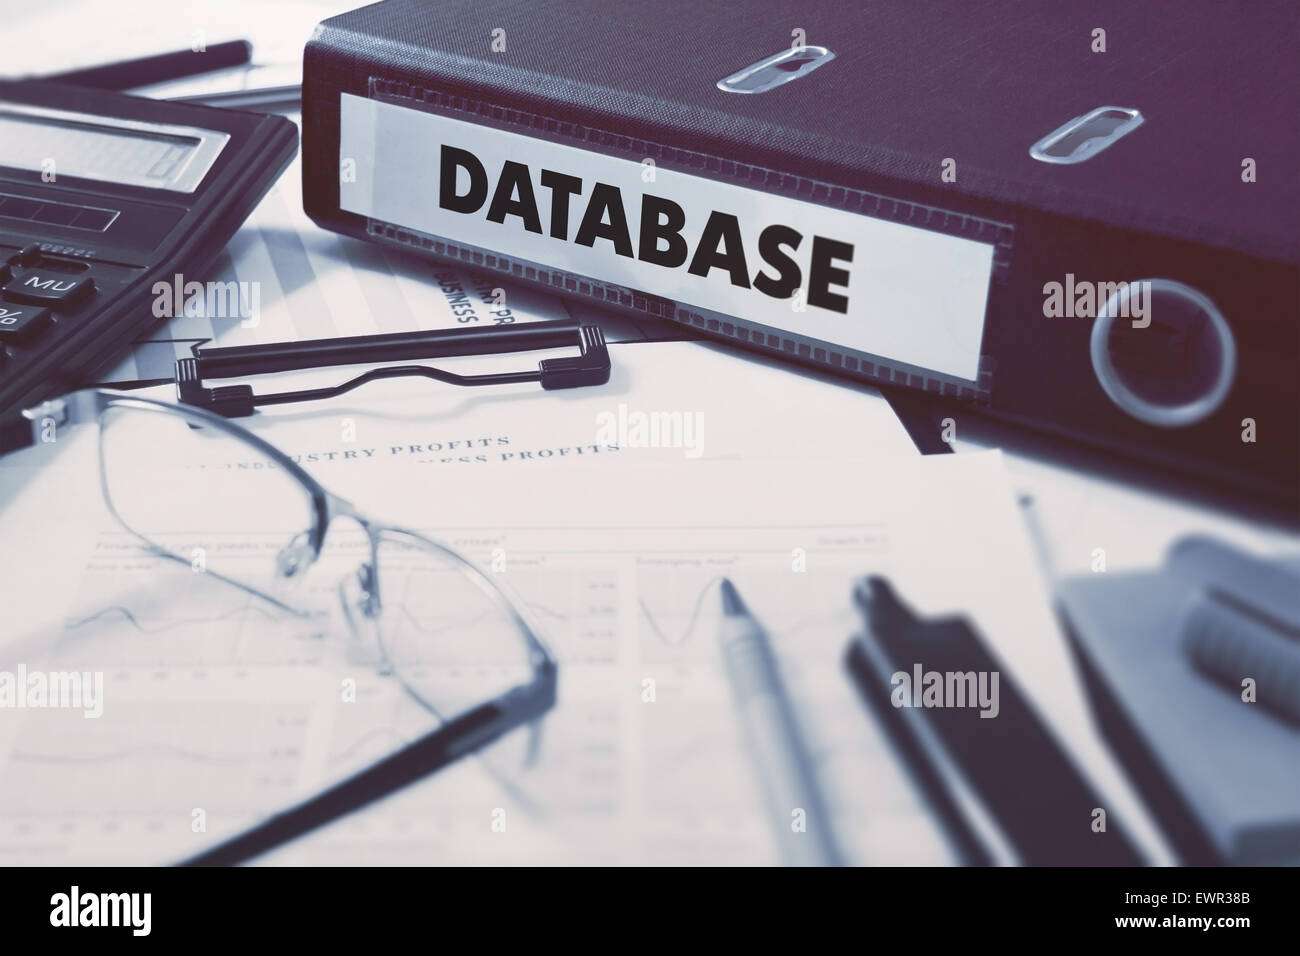 Database - Office Folder on Background of Working Table with Stationery, Glasses, Reports. Business Concept on Blurred Backgroun Stock Photo